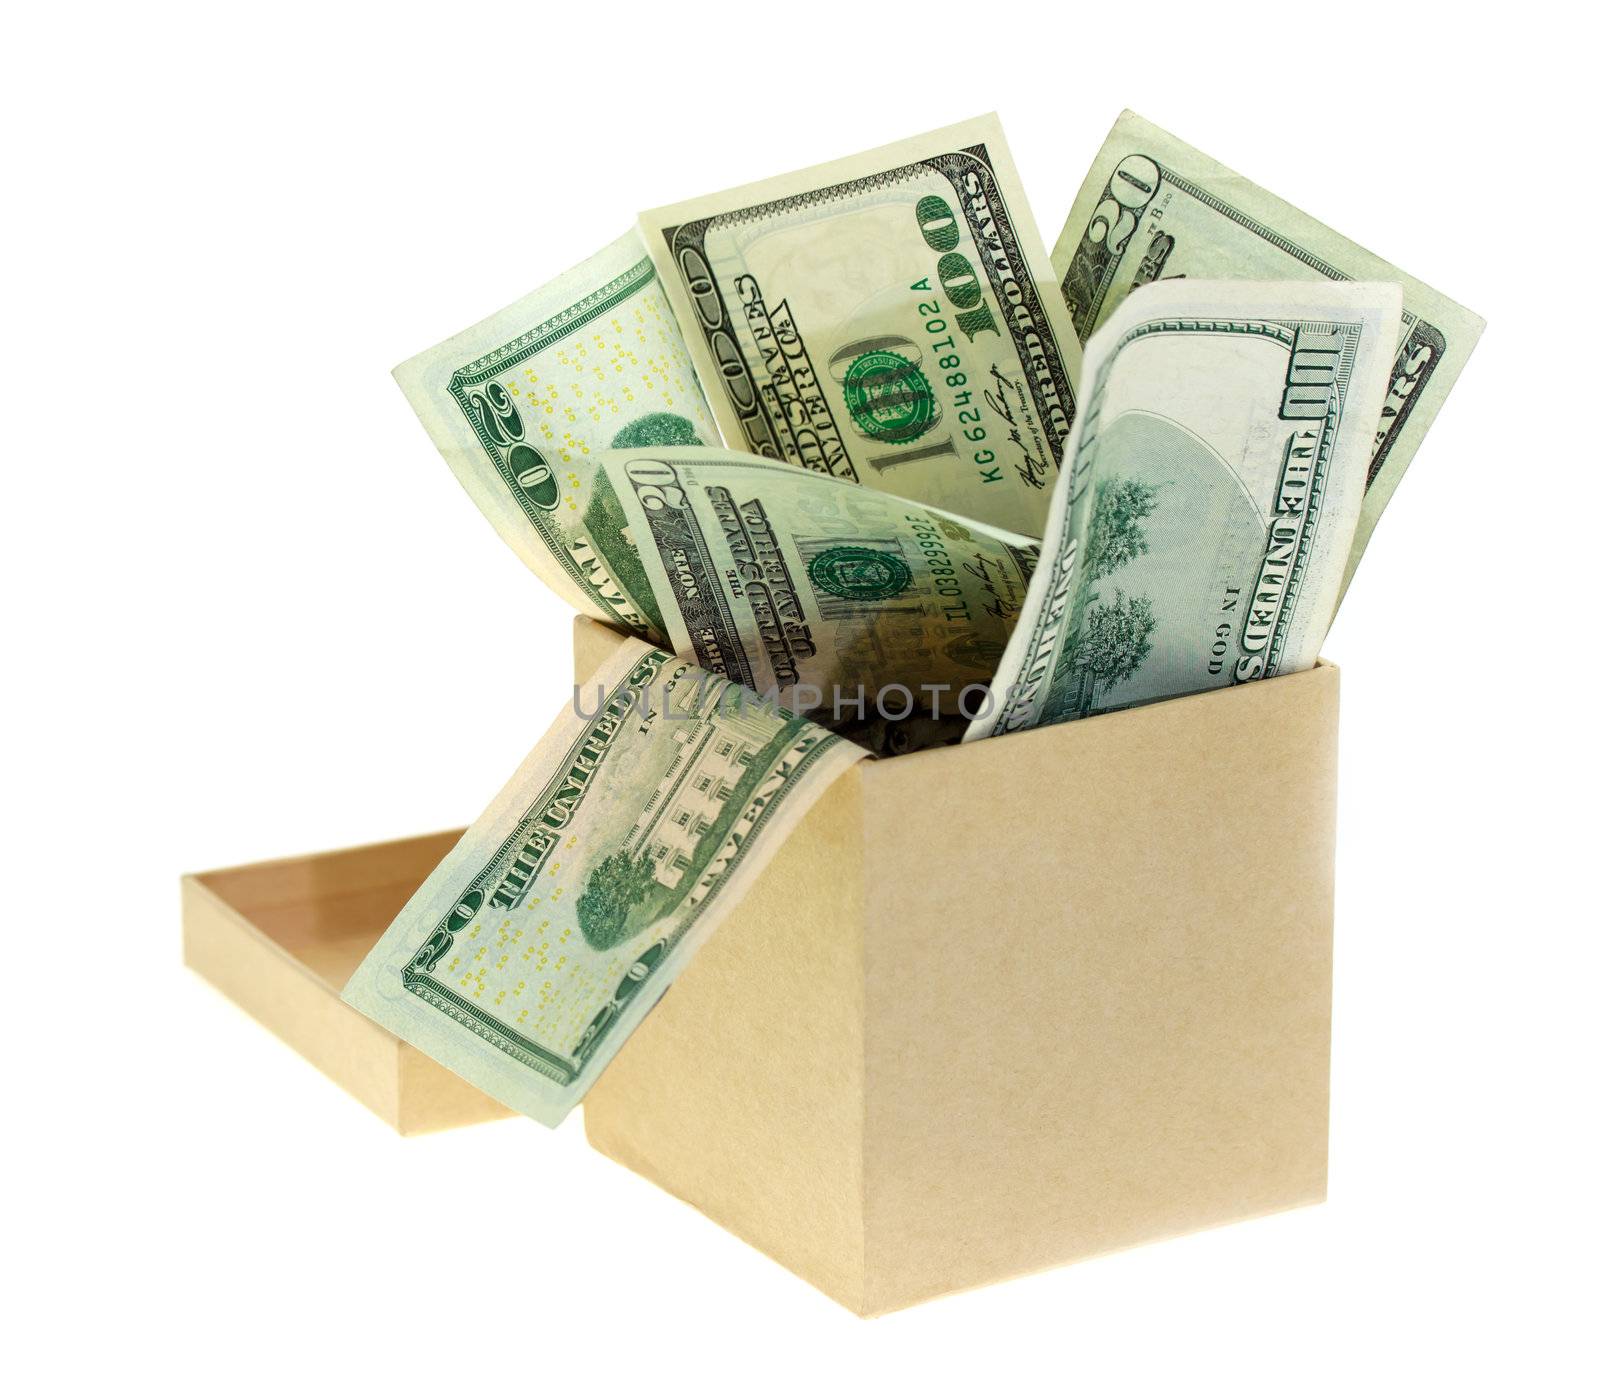 US dollar bills in the box on white background